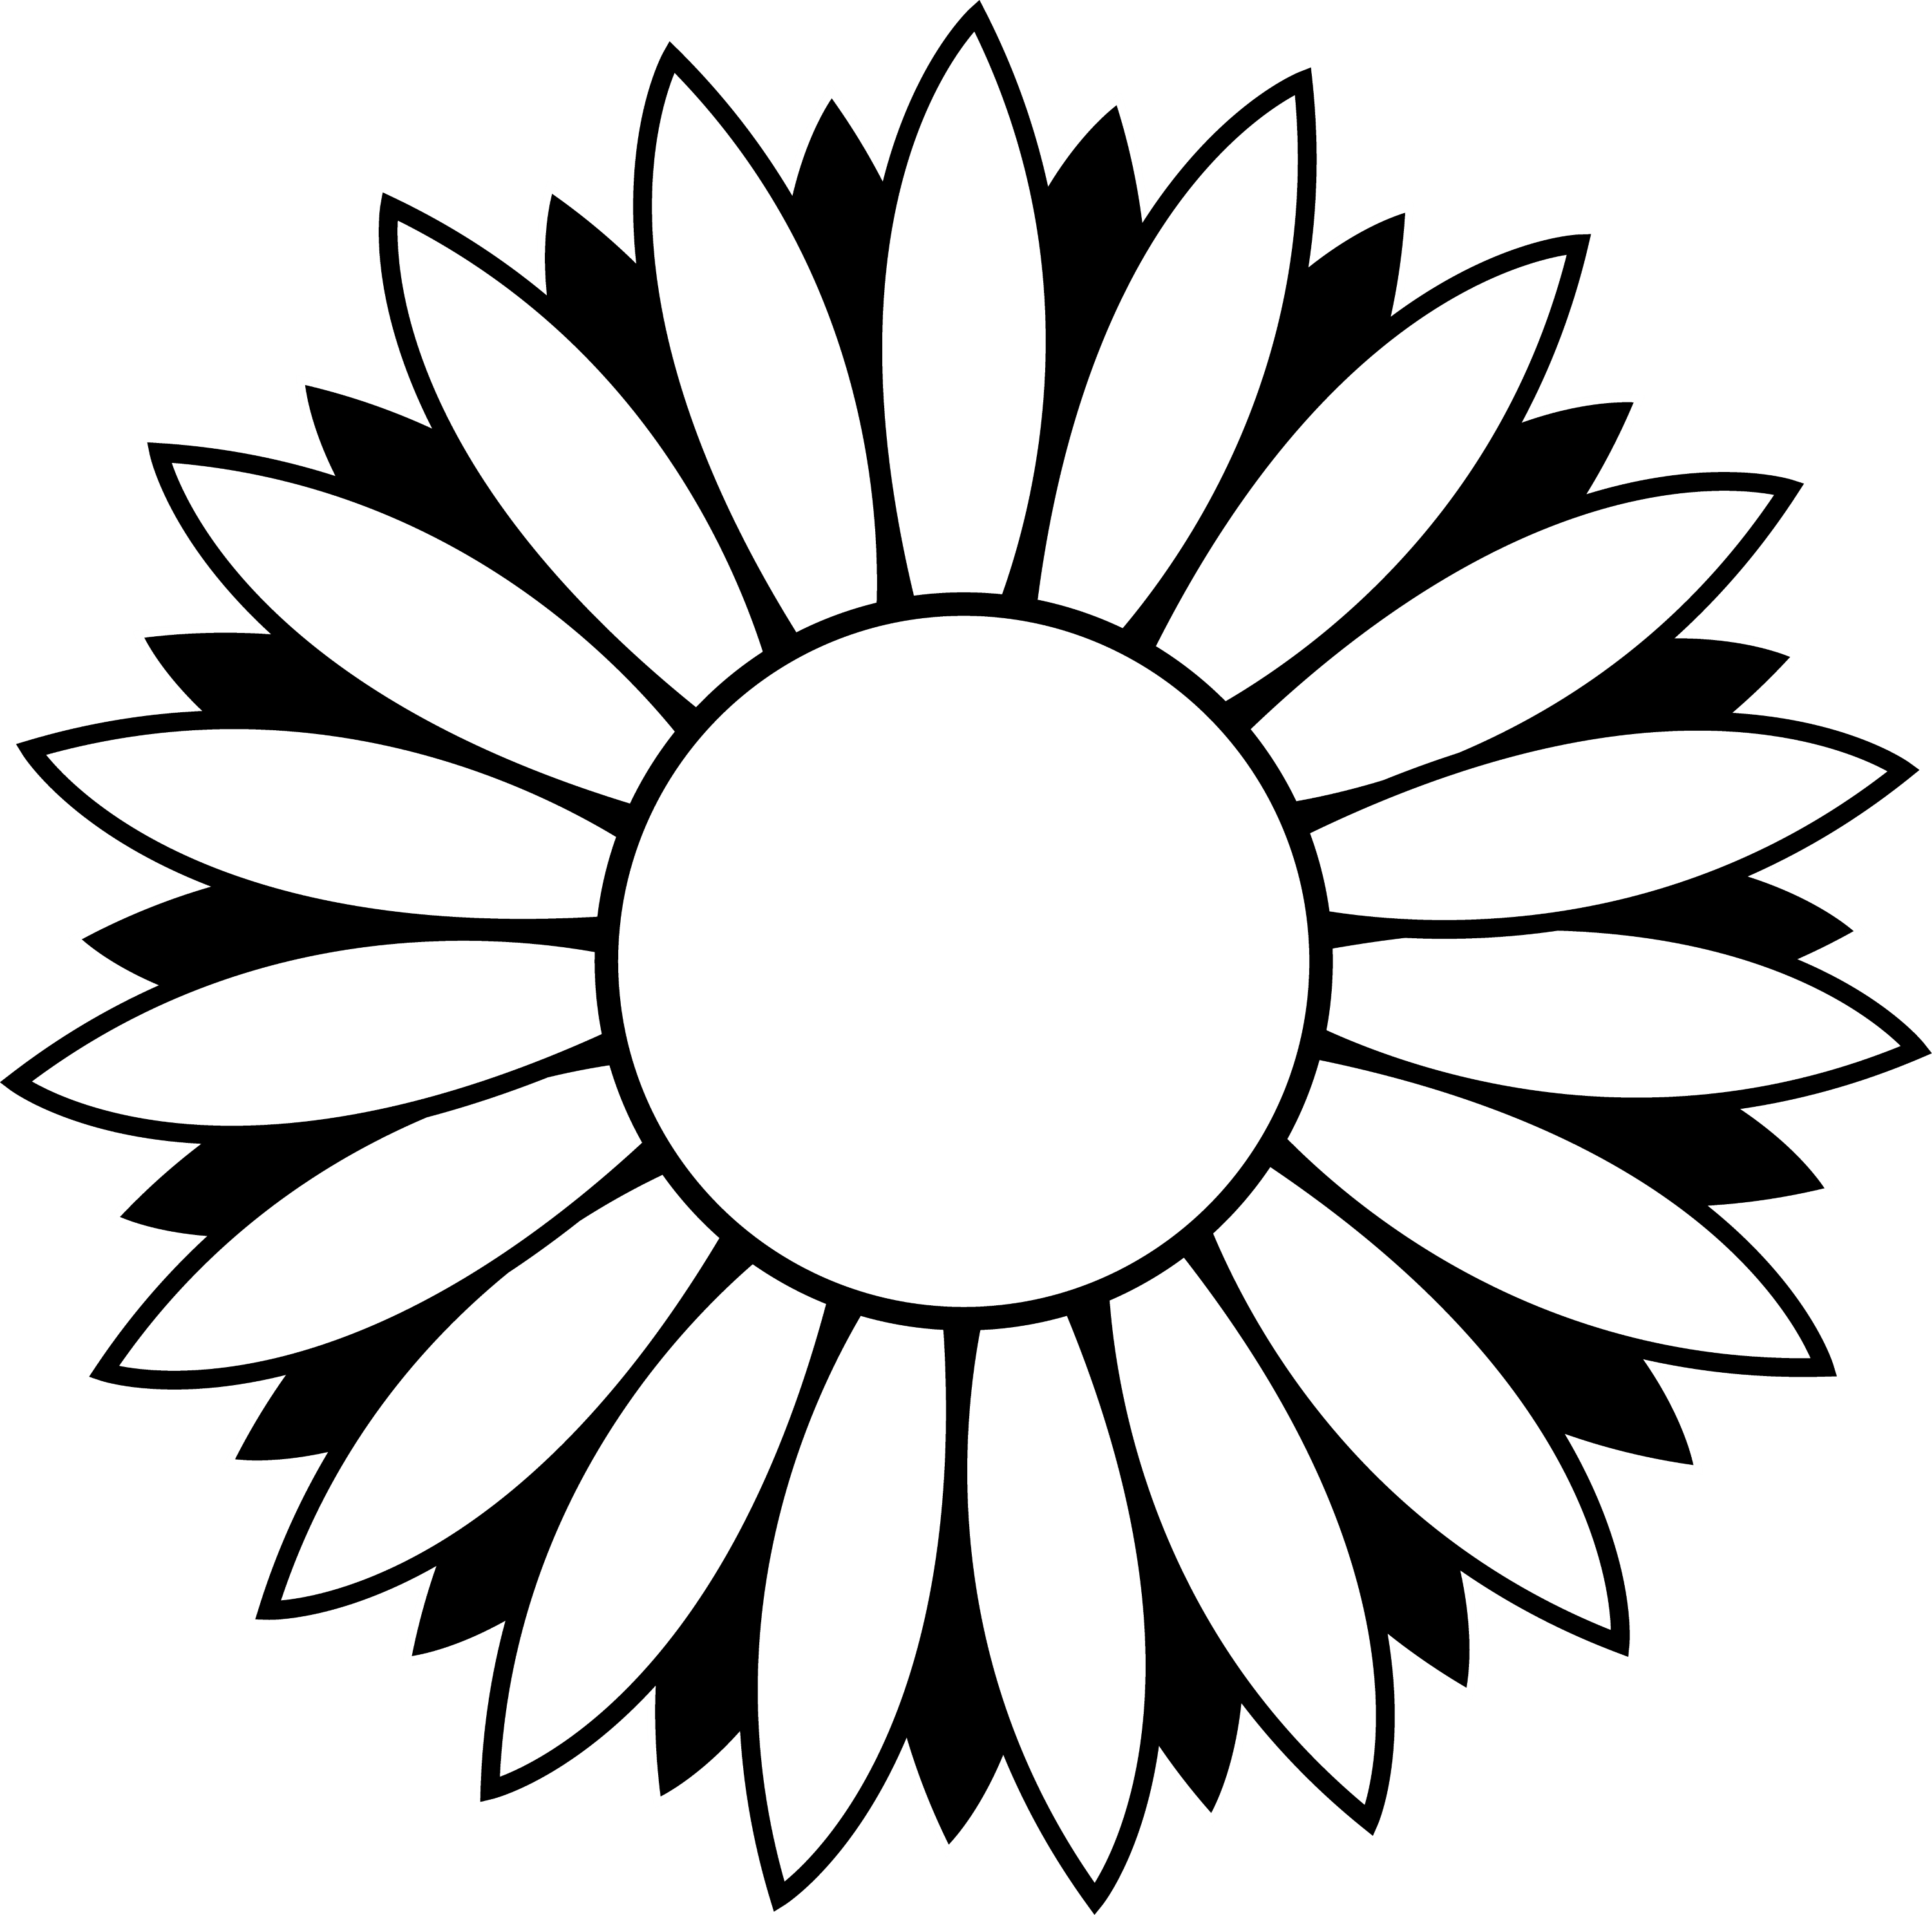 free black and white clip art sunflowers - photo #1